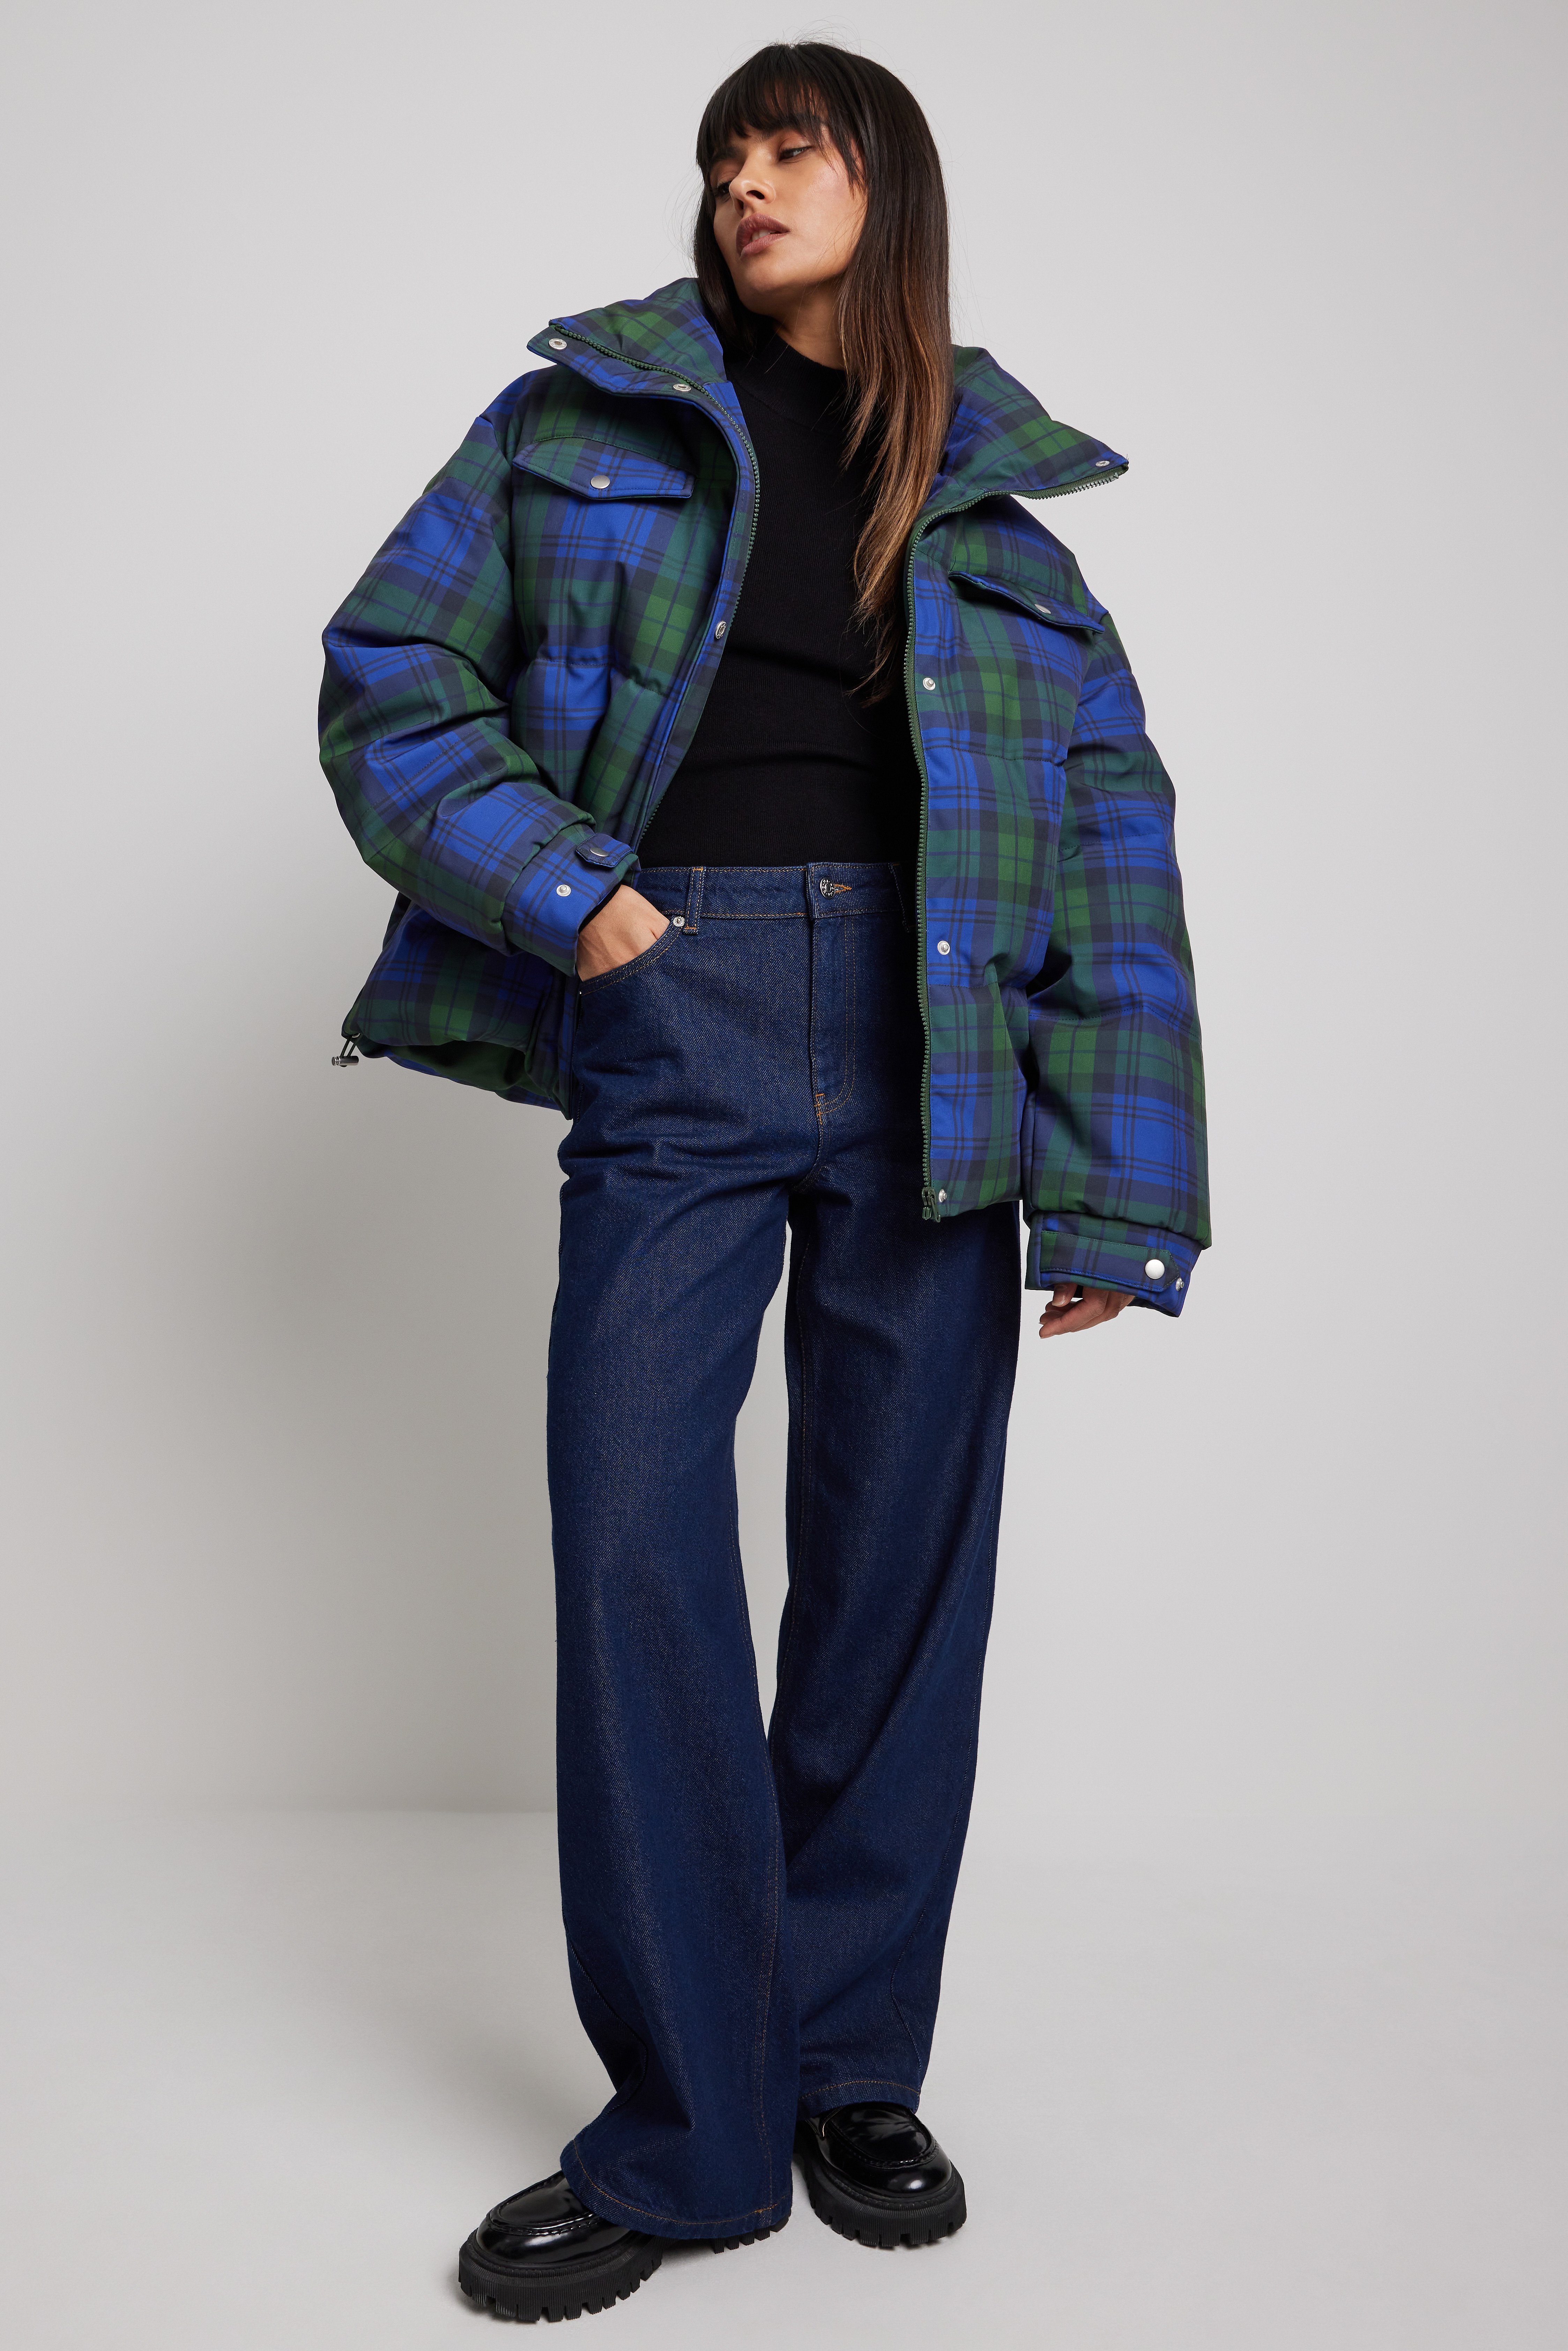 Checked Puffer Jacket Outfit